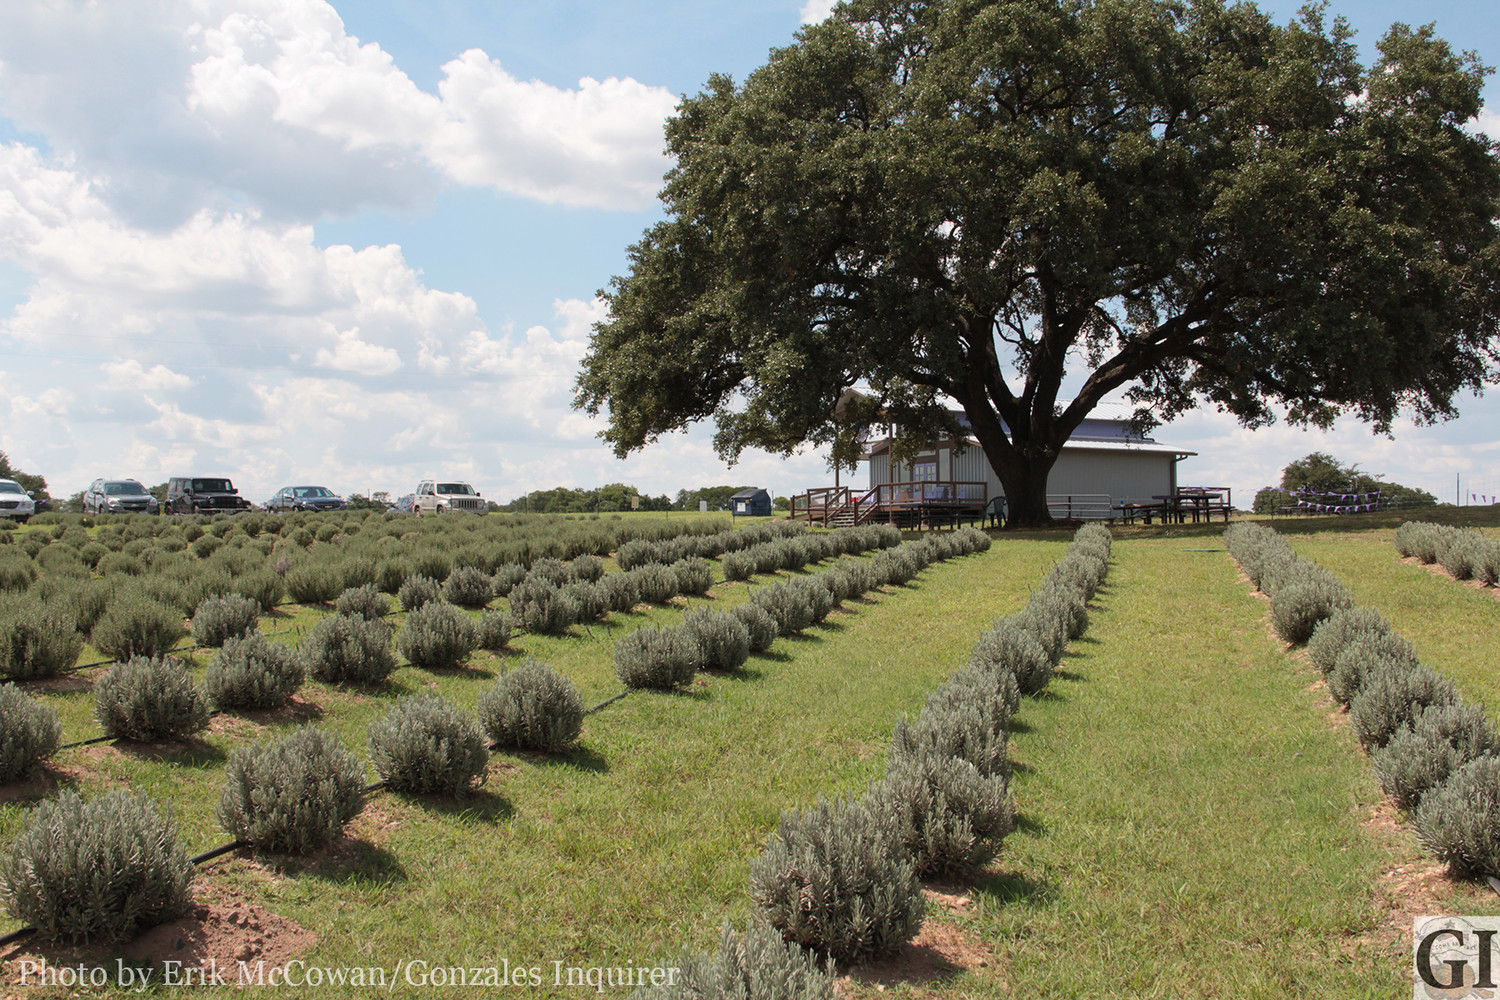 Just north of I-10 and east of U.S. 183 sits Luling Lavender Fields, where a local family is hoping to establish a new market for these sweet-smelling purple buds.